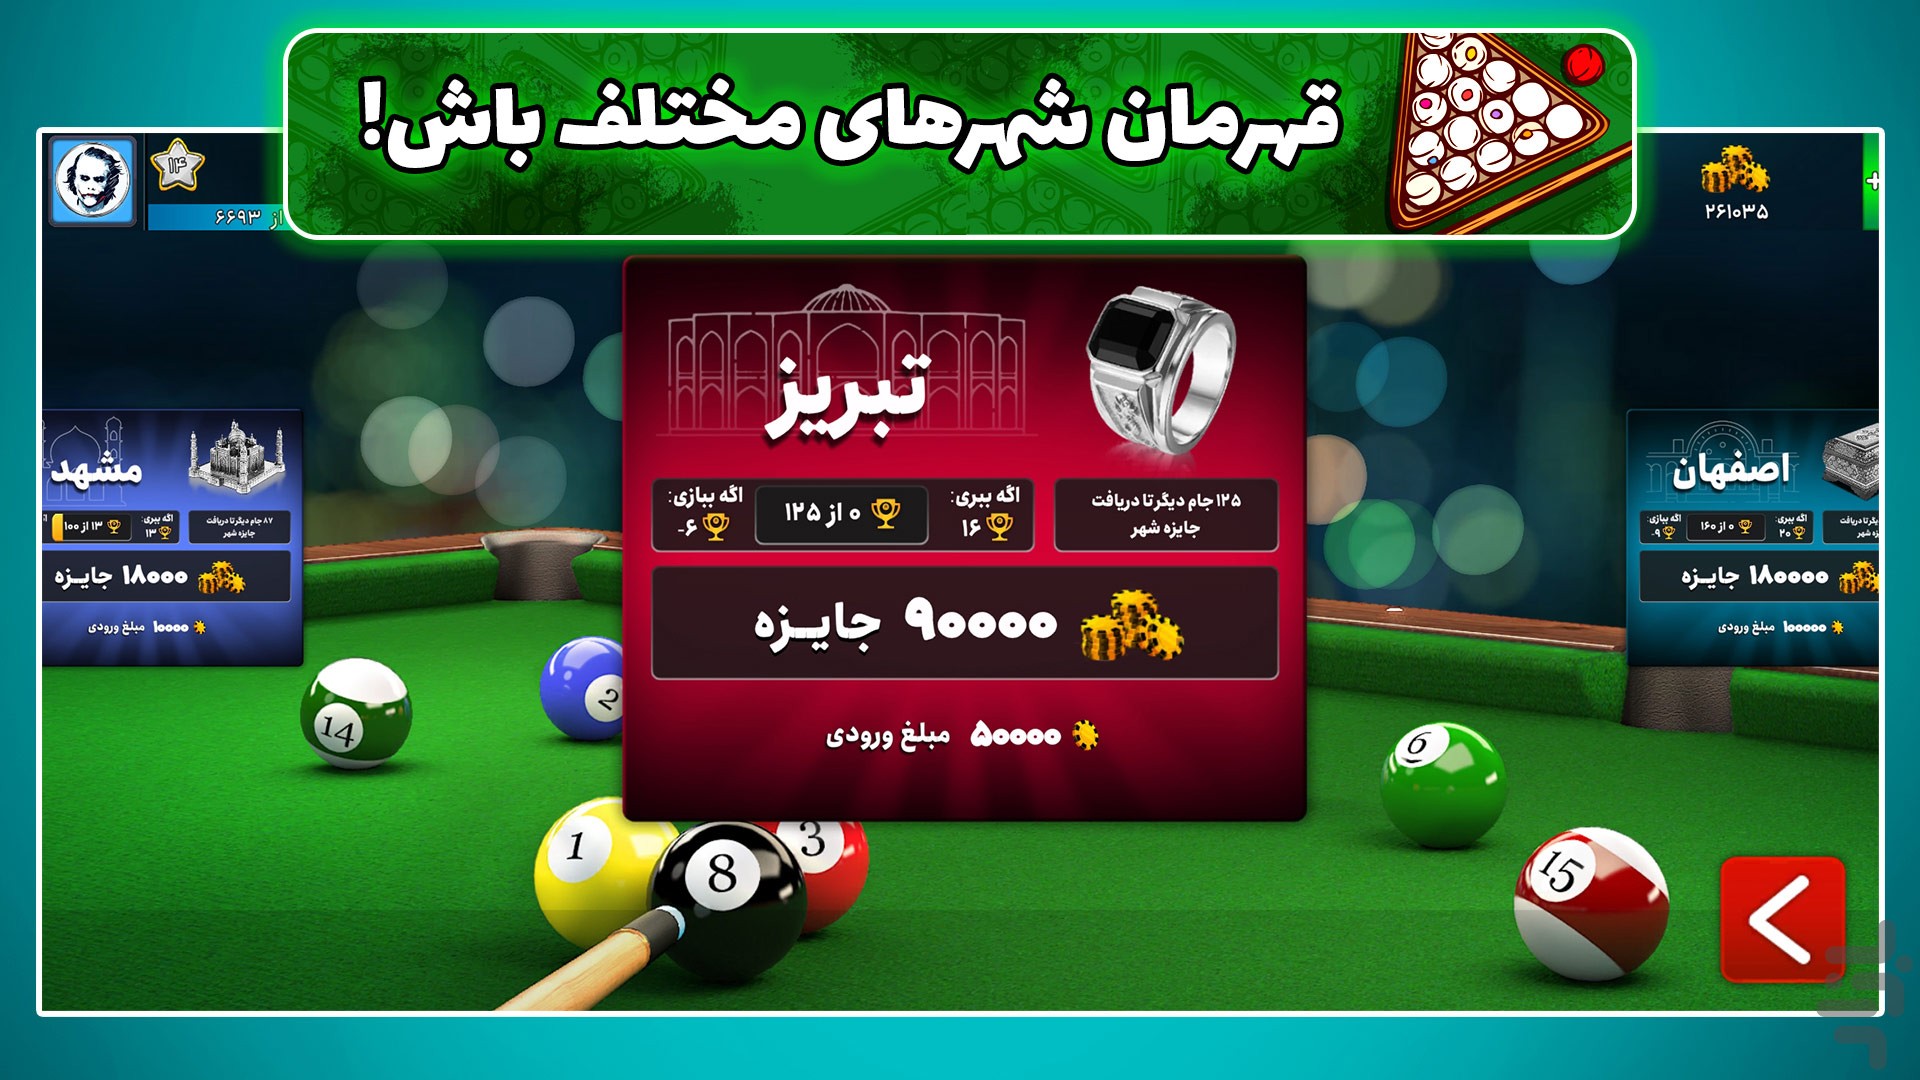 Super Billiards Online - 8 Ball Pool Game for Android